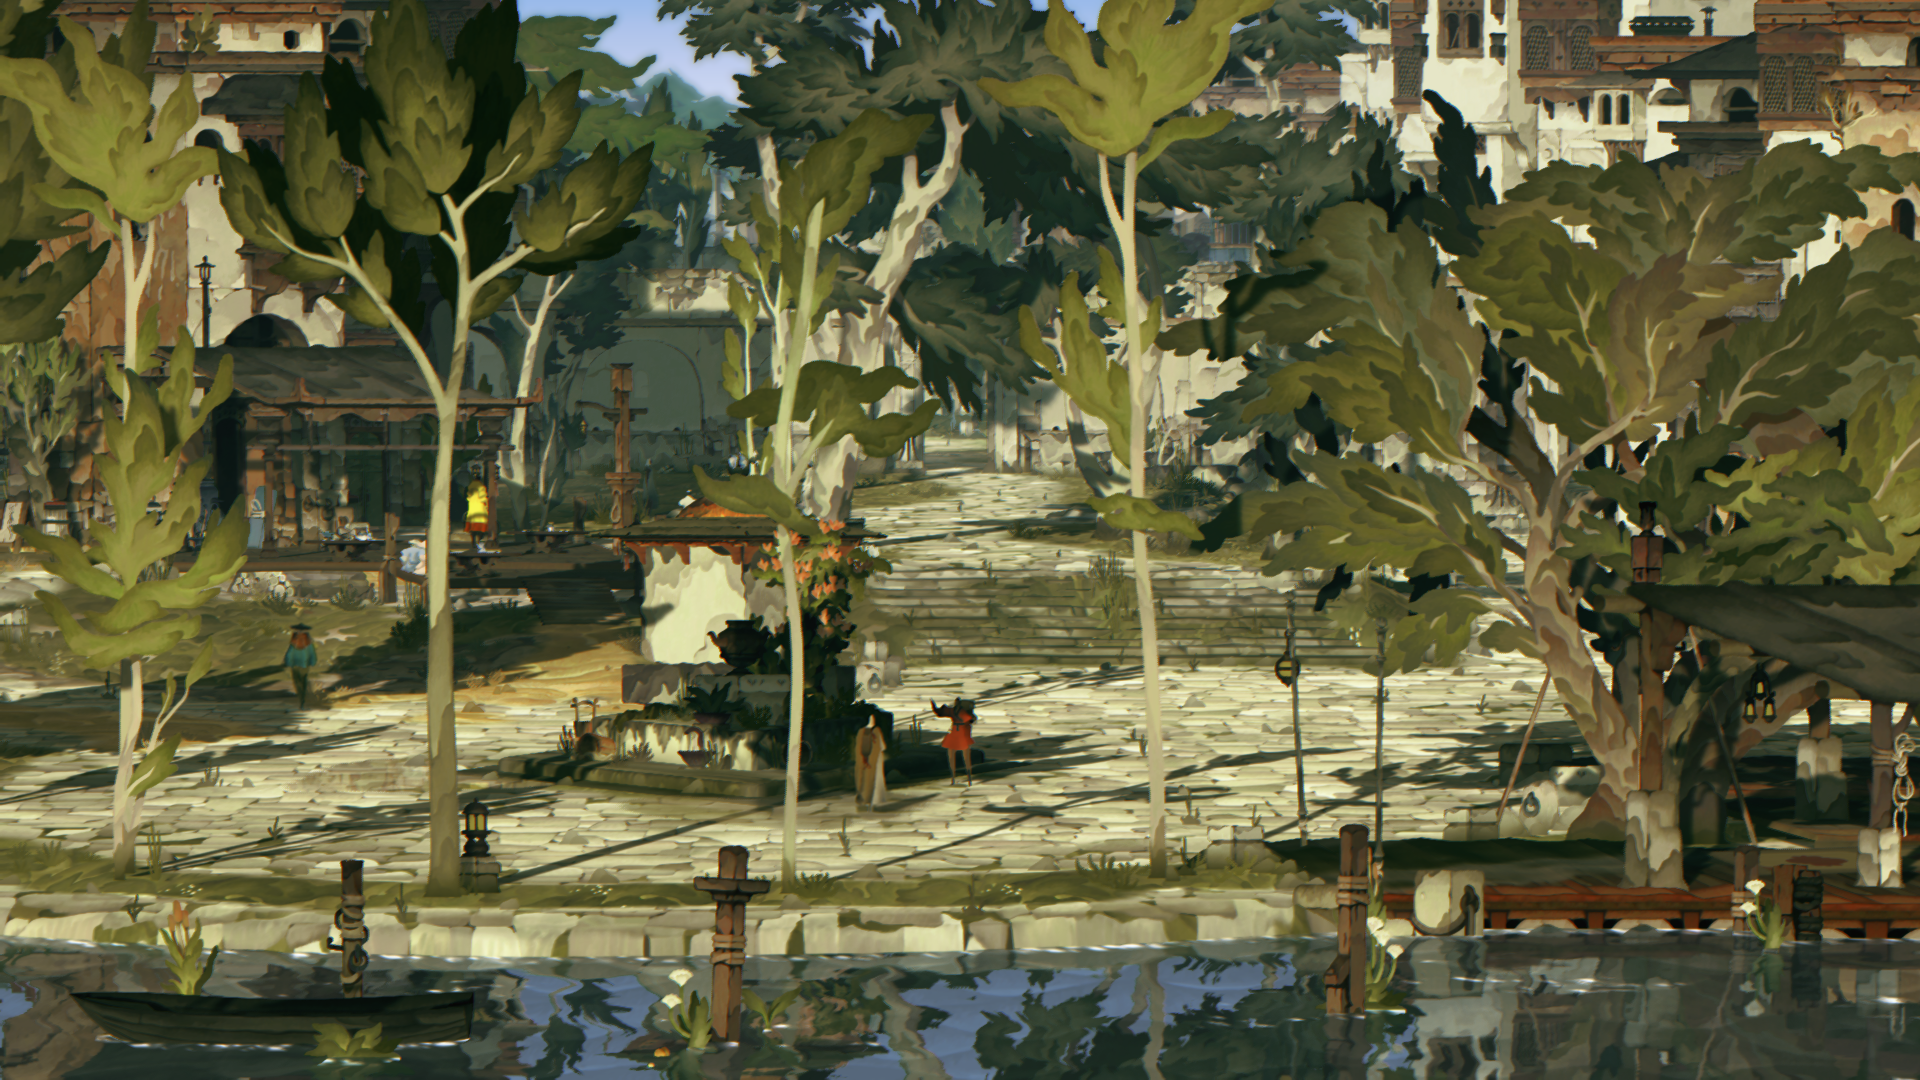 A more populated scene from the game Book of Travels set in Kasa, featuring four characters engaged in various activities. Two characters seem to be conversing in the foreground, another is in what appears to be a shop, and the fourth is walking towards a small wooden boat on the lake. There's also a small steam boat station in the right corner. The image presents a more detailed view of Kasa with additional trees and buildings, illustrating the intricate and lively environment of the game.